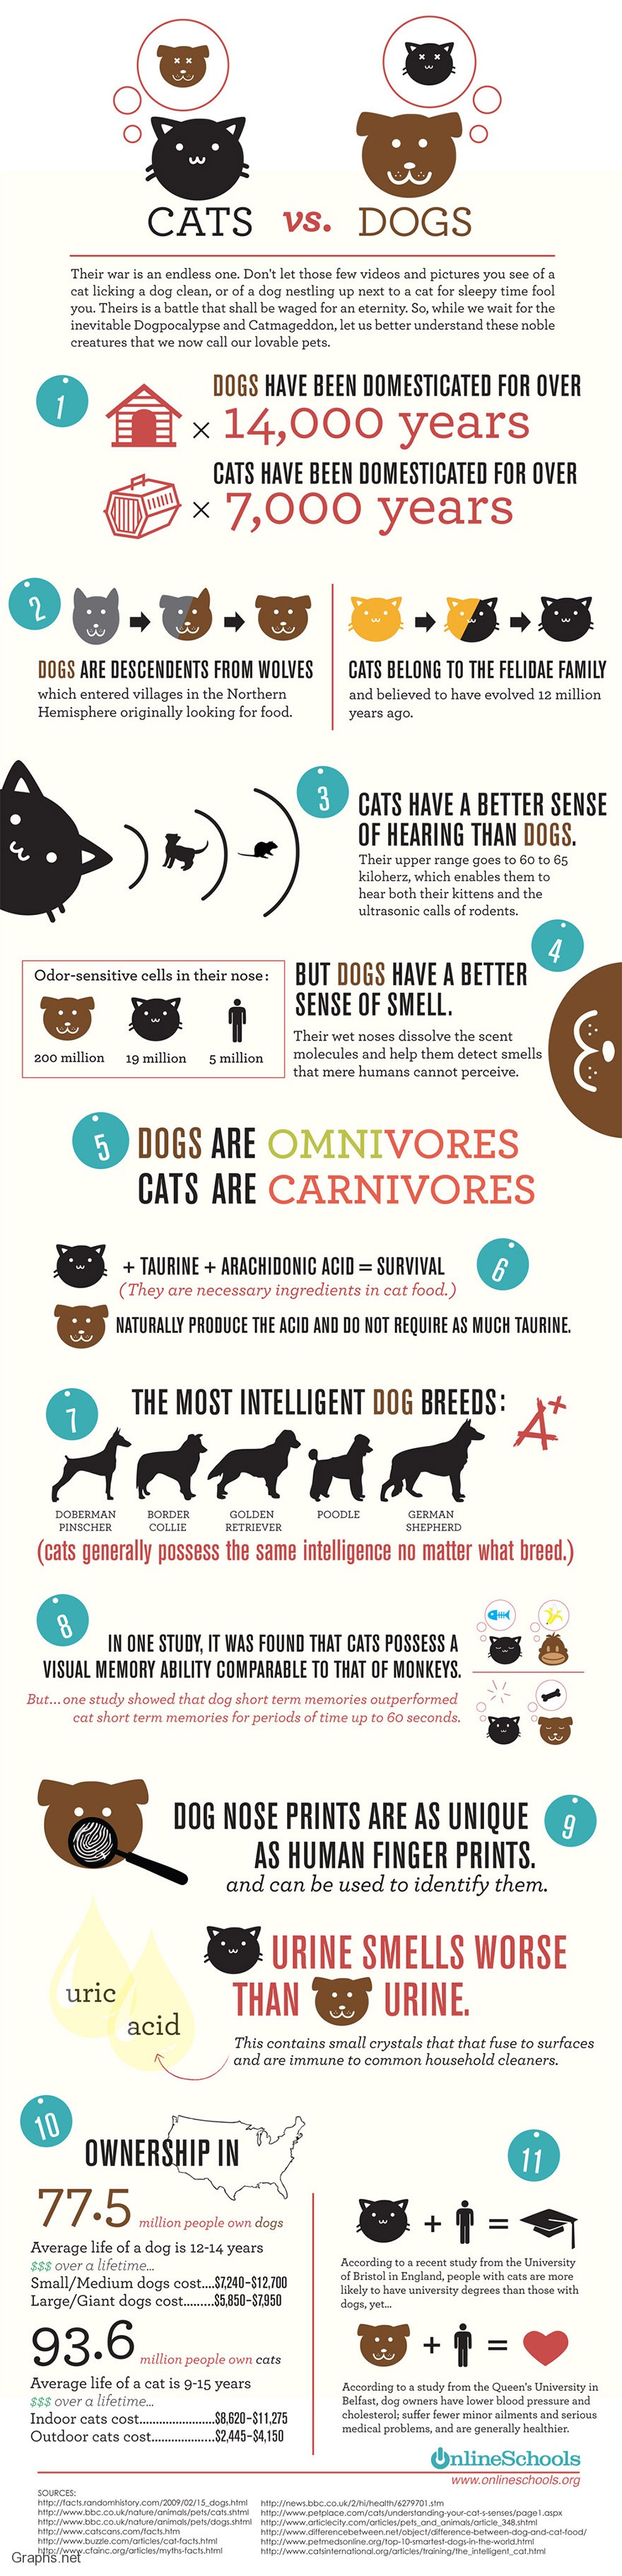 The Top 5 Reason on why you should Chose a Dog Over Cat